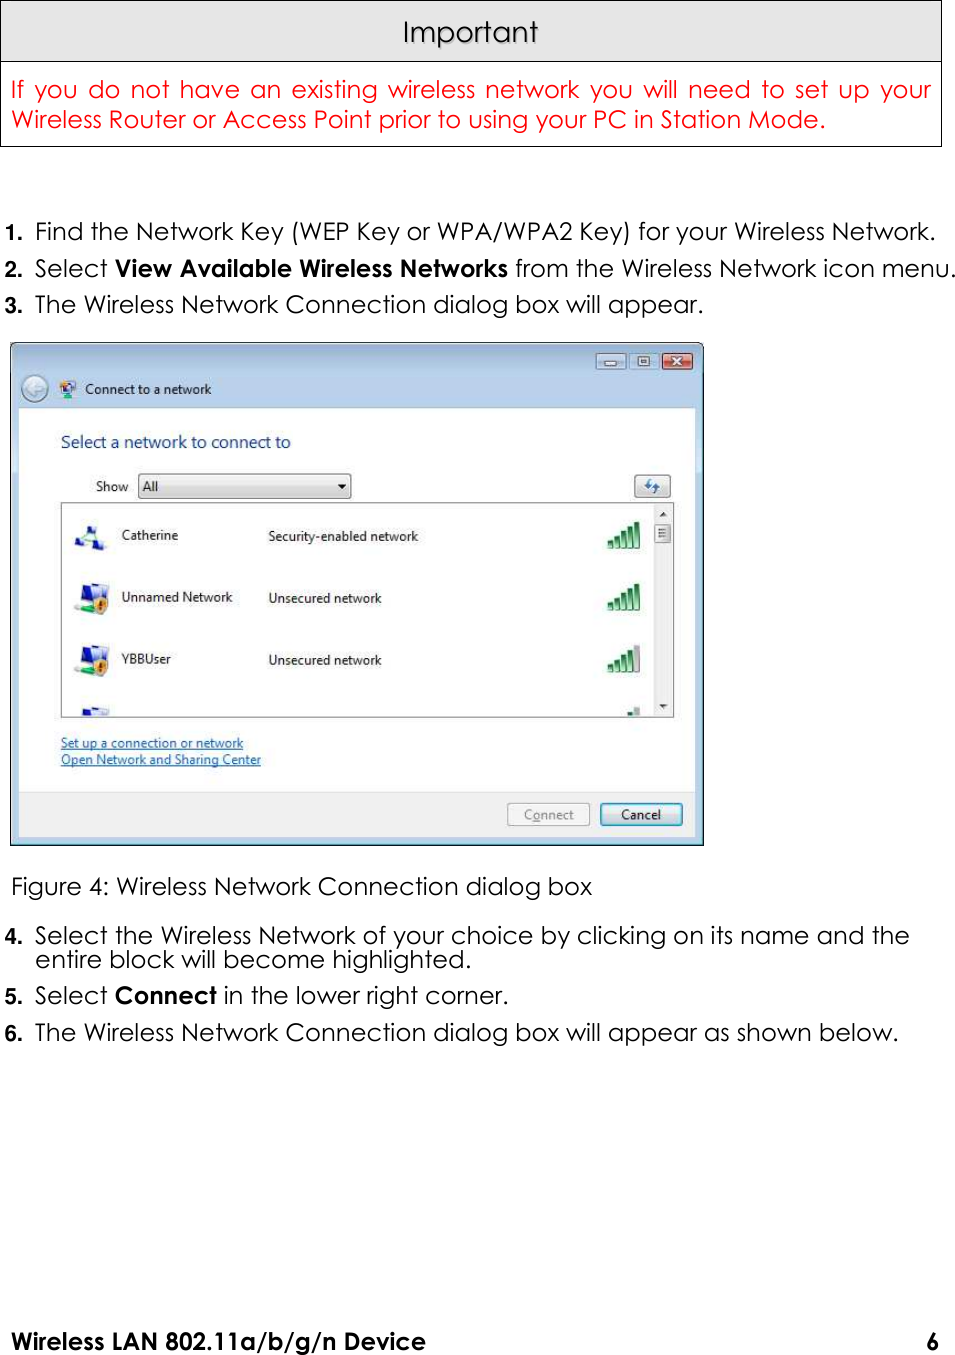 Wireless LAN 802.11a/b/g/n Device                                                                                  6  IImmppoorrttaanntt  If you do  not have an  existing  wireless network  you will  need to set  up  your Wireless Router or Access Point prior to using your PC in Station Mode.  1. Find the Network Key (WEP Key or WPA/WPA2 Key) for your Wireless Network. 2. Select View Available Wireless Networks from the Wireless Network icon menu. 3. The Wireless Network Connection dialog box will appear.    Figure 4: Wireless Network Connection dialog box 4. Select the Wireless Network of your choice by clicking on its name and the entire block will become highlighted. 5. Select Connect in the lower right corner. 6. The Wireless Network Connection dialog box will appear as shown below. 